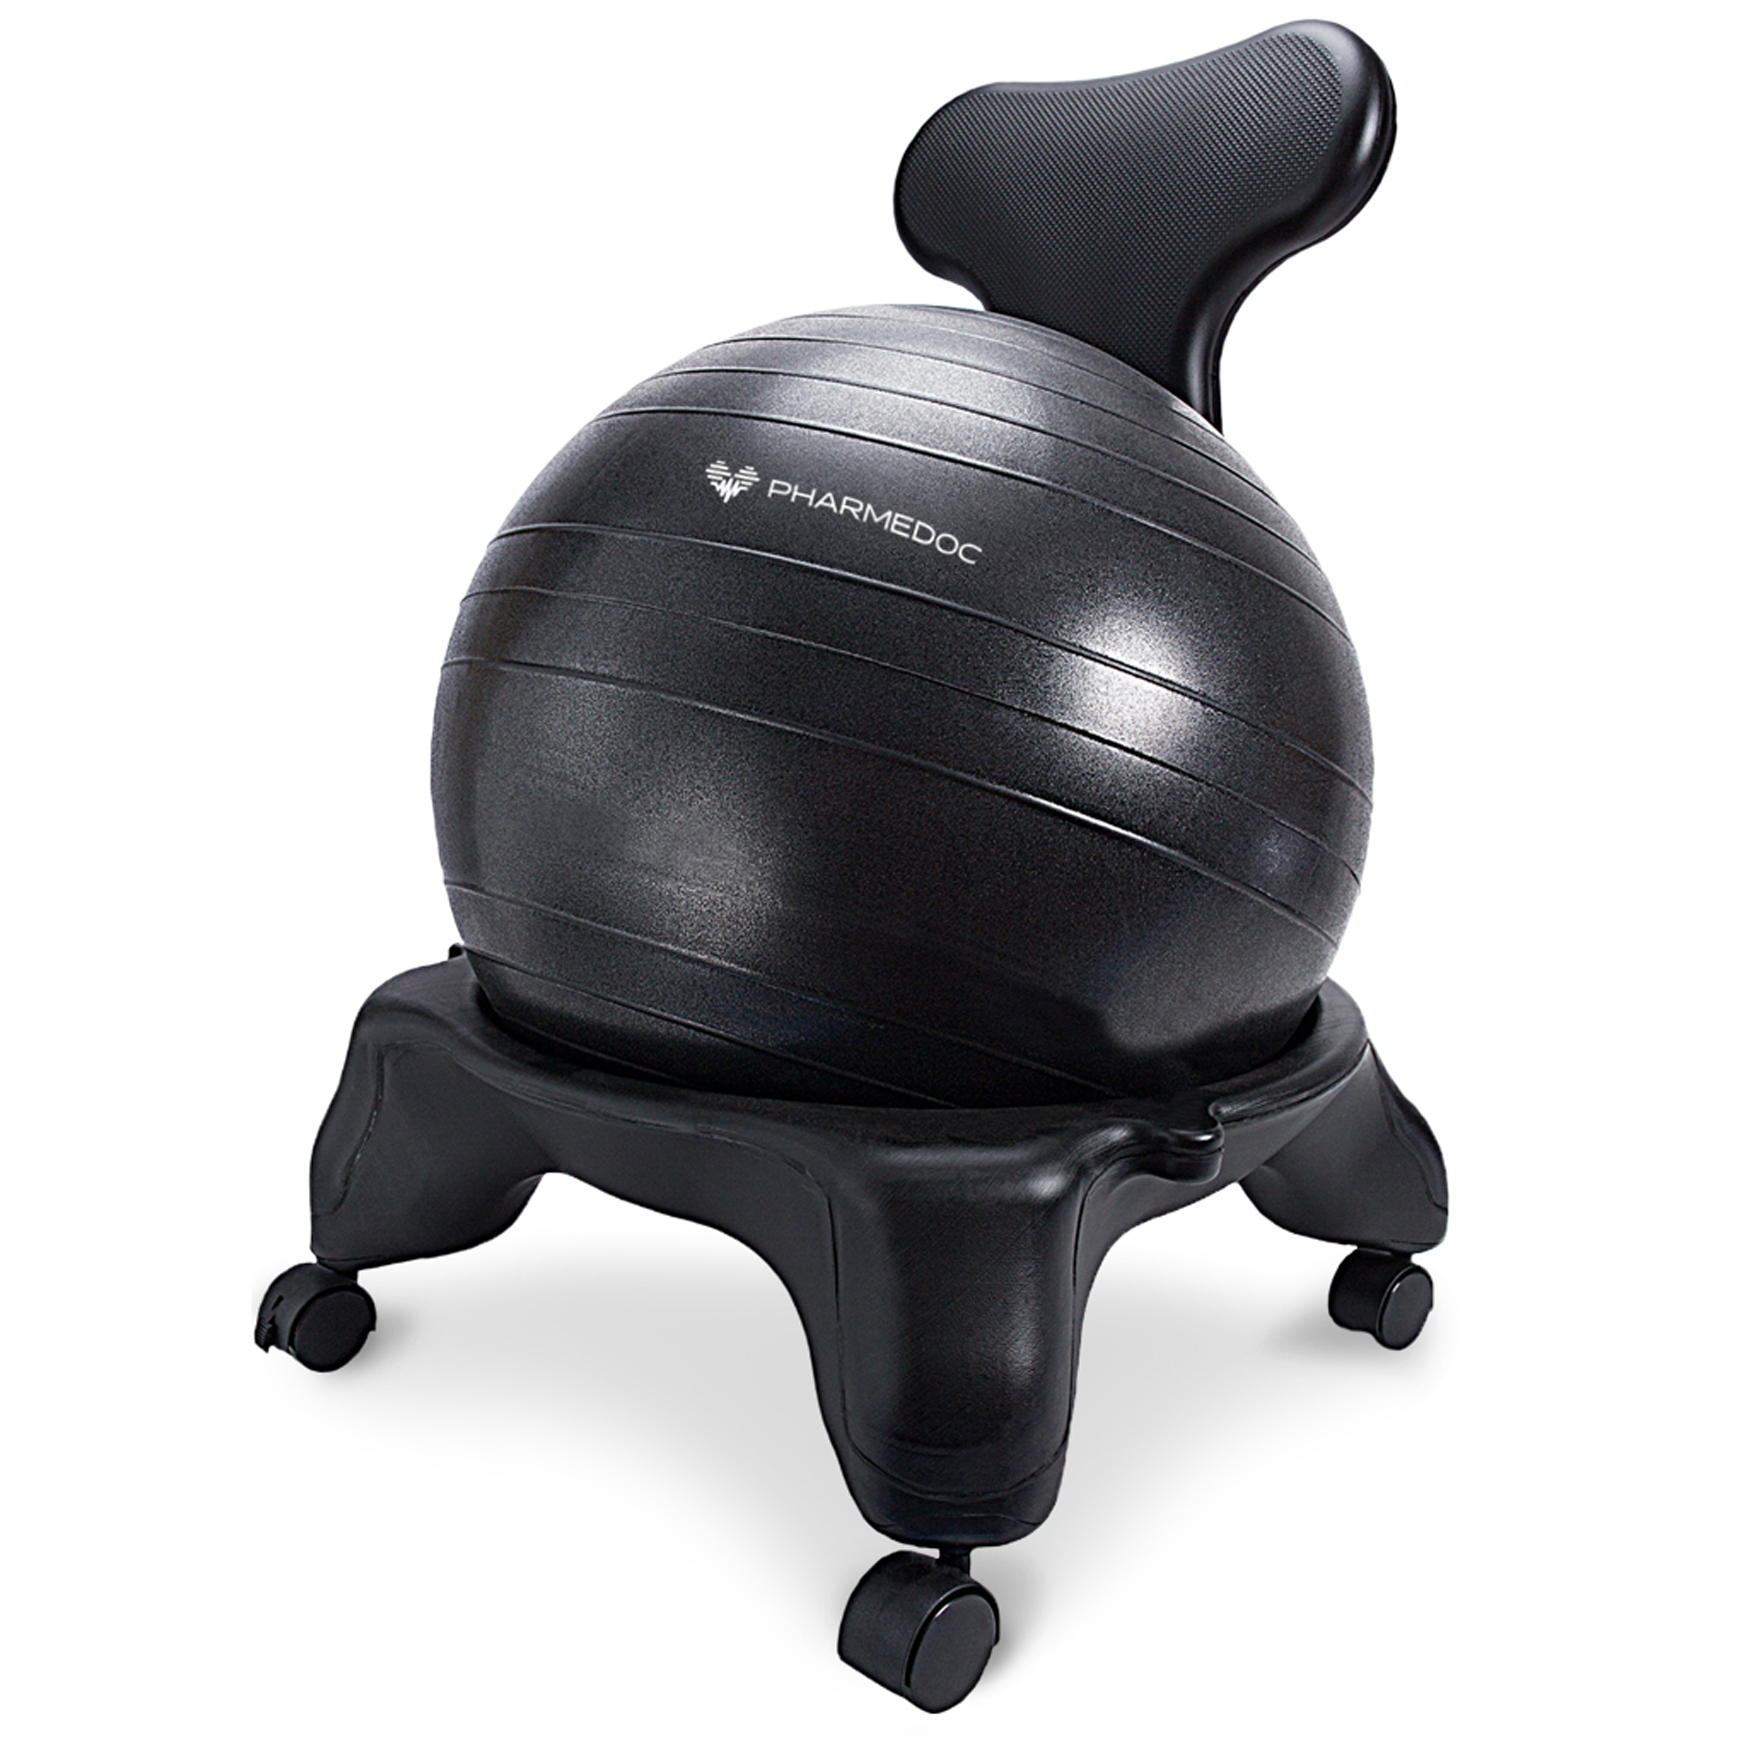 PharMeDoc Exercise Balance Ball Chair with Base & Back Support for Home and Office - Stability Ball Chair & Exercise Ball - image 1 of 7